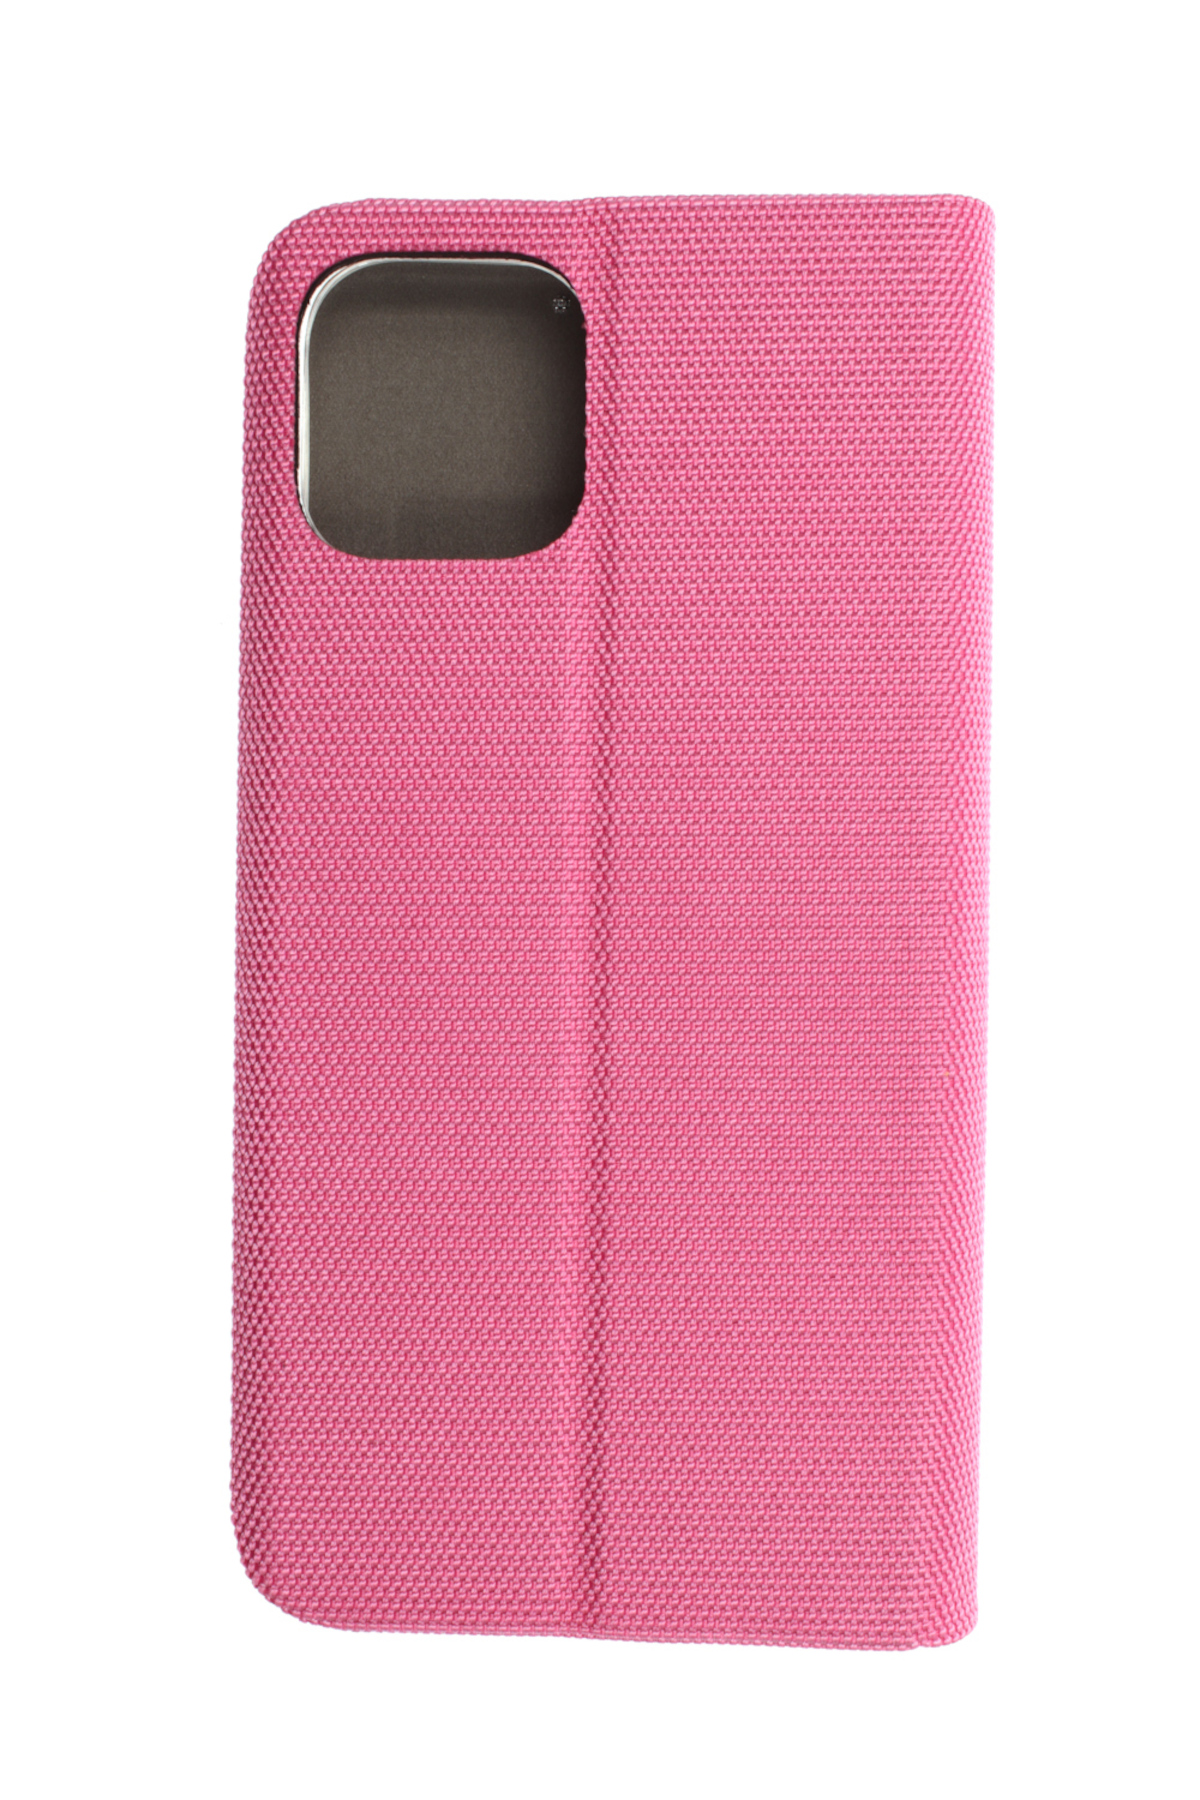 Rosa 12 JAMCOVER Max, Pro iPhone Apple, Bookcover, Bookcase Mix,